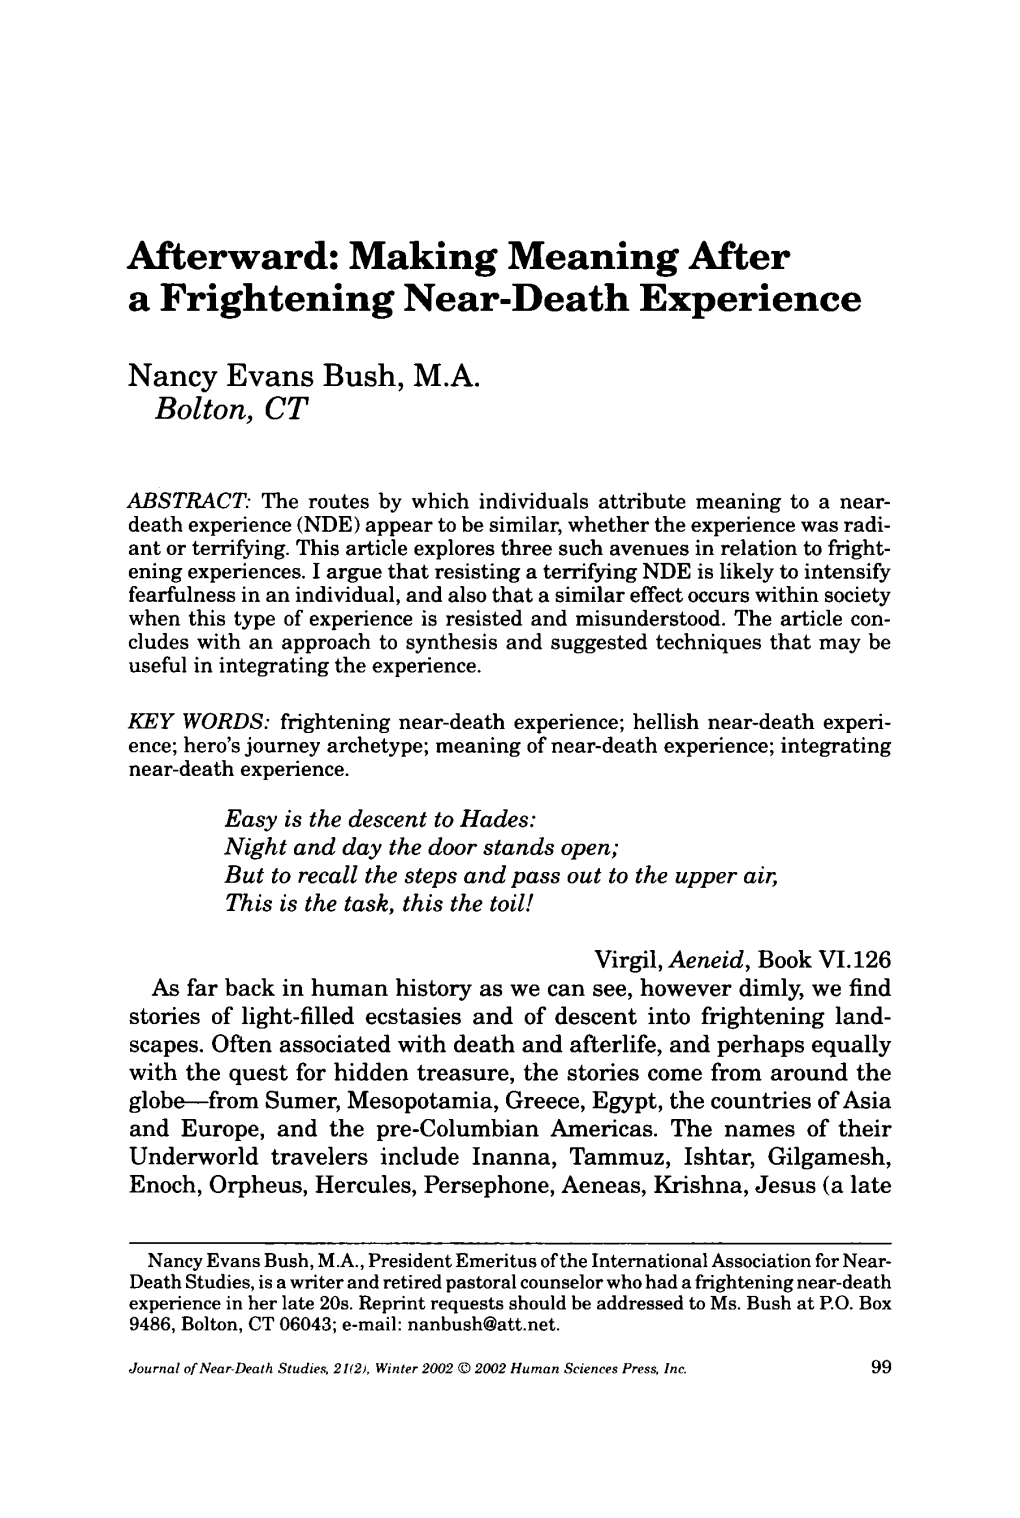 Making Meaning After a Frightening Near-Death Experience